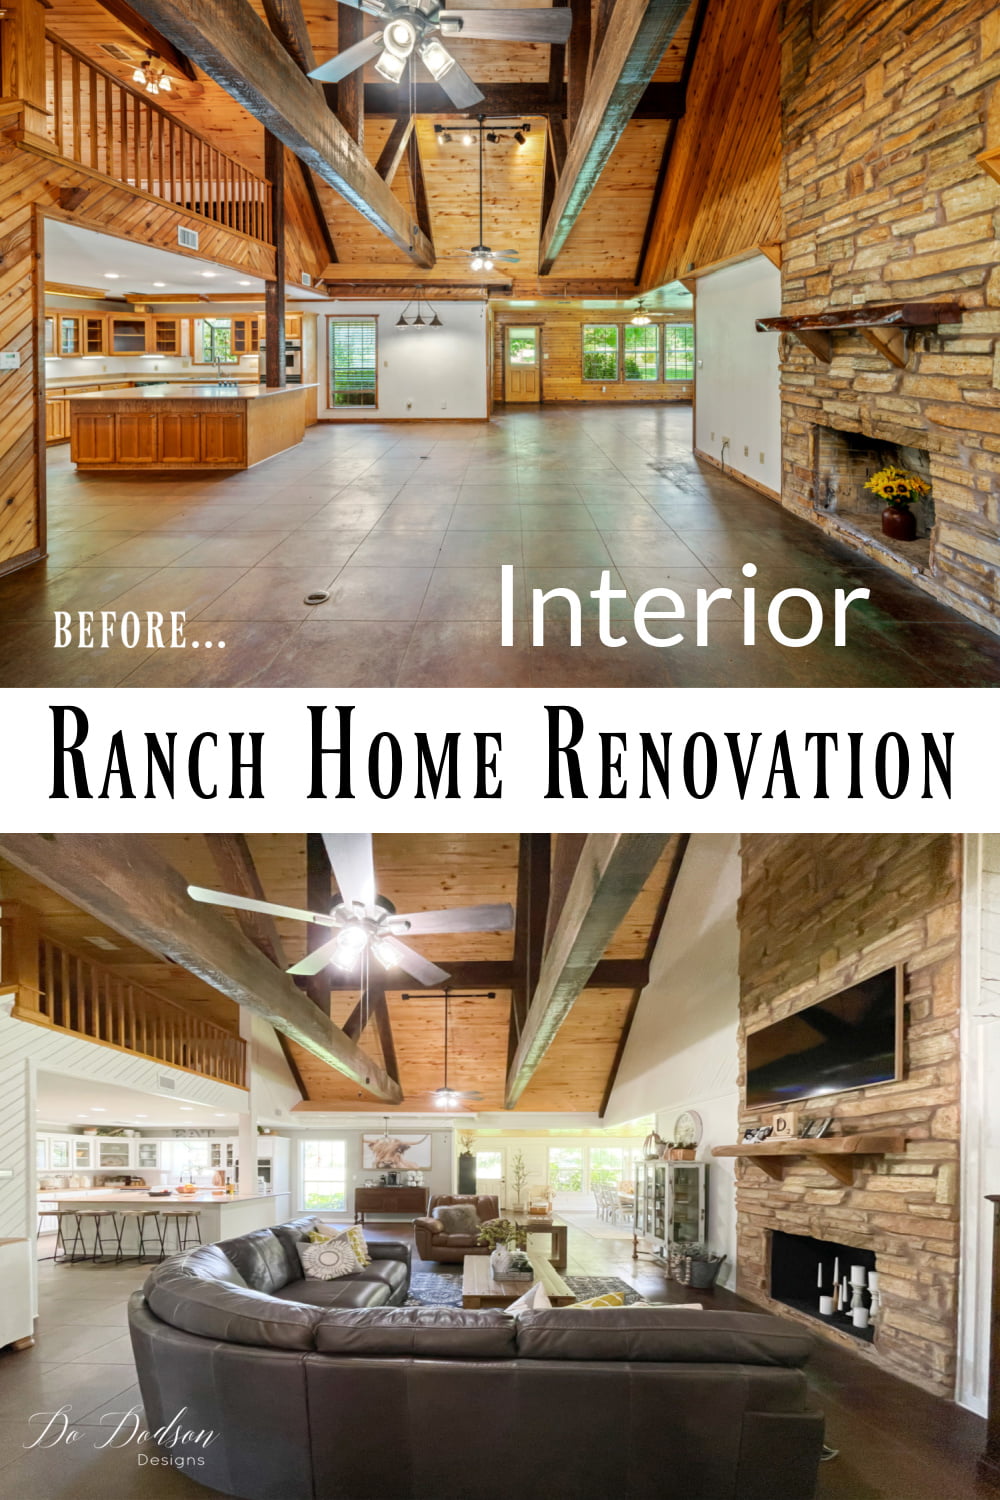 Our Ranch Home Renovation - Before After Interior Part 1